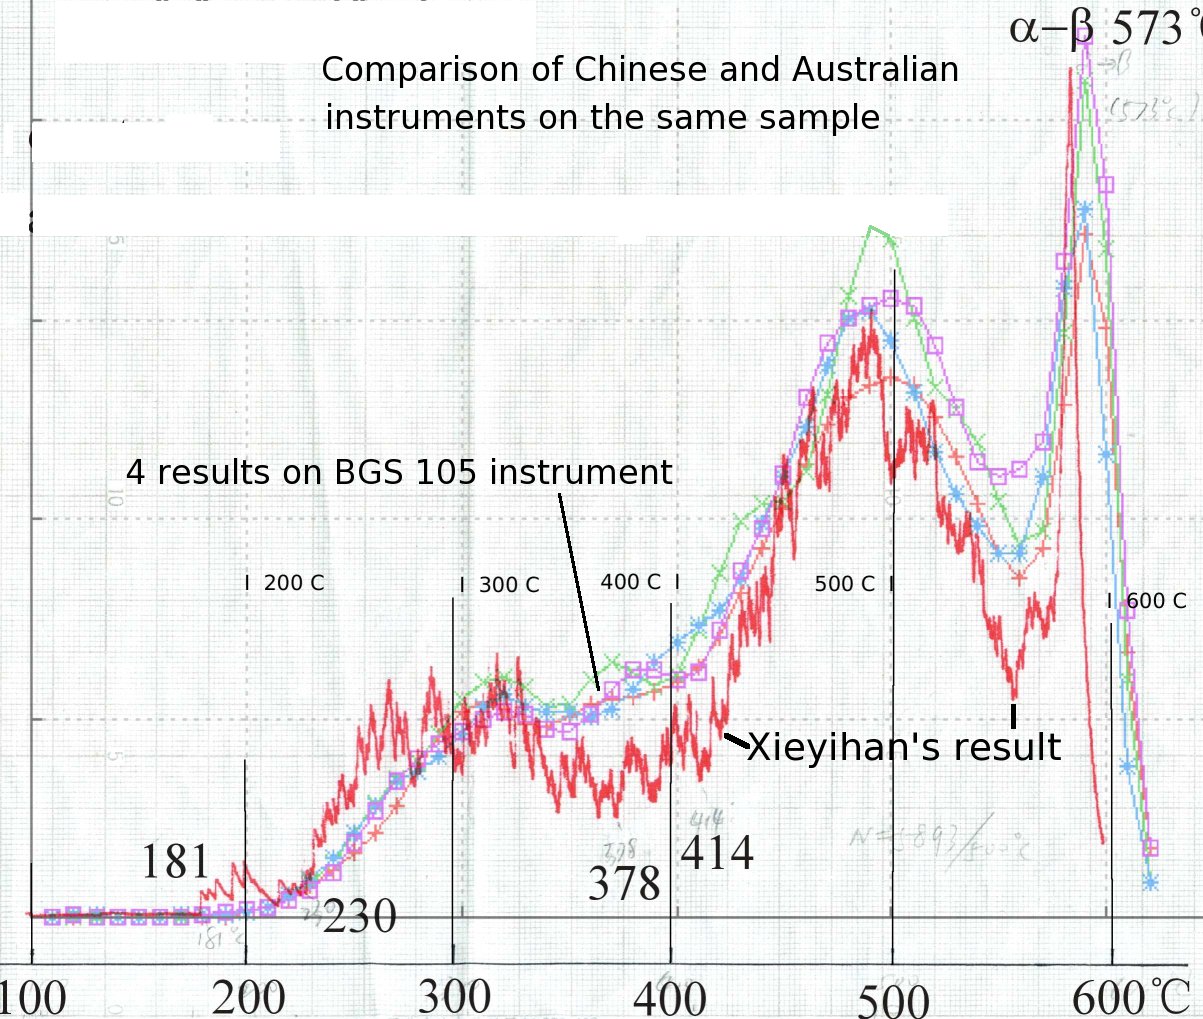 results on BGS and
      chinese instruments